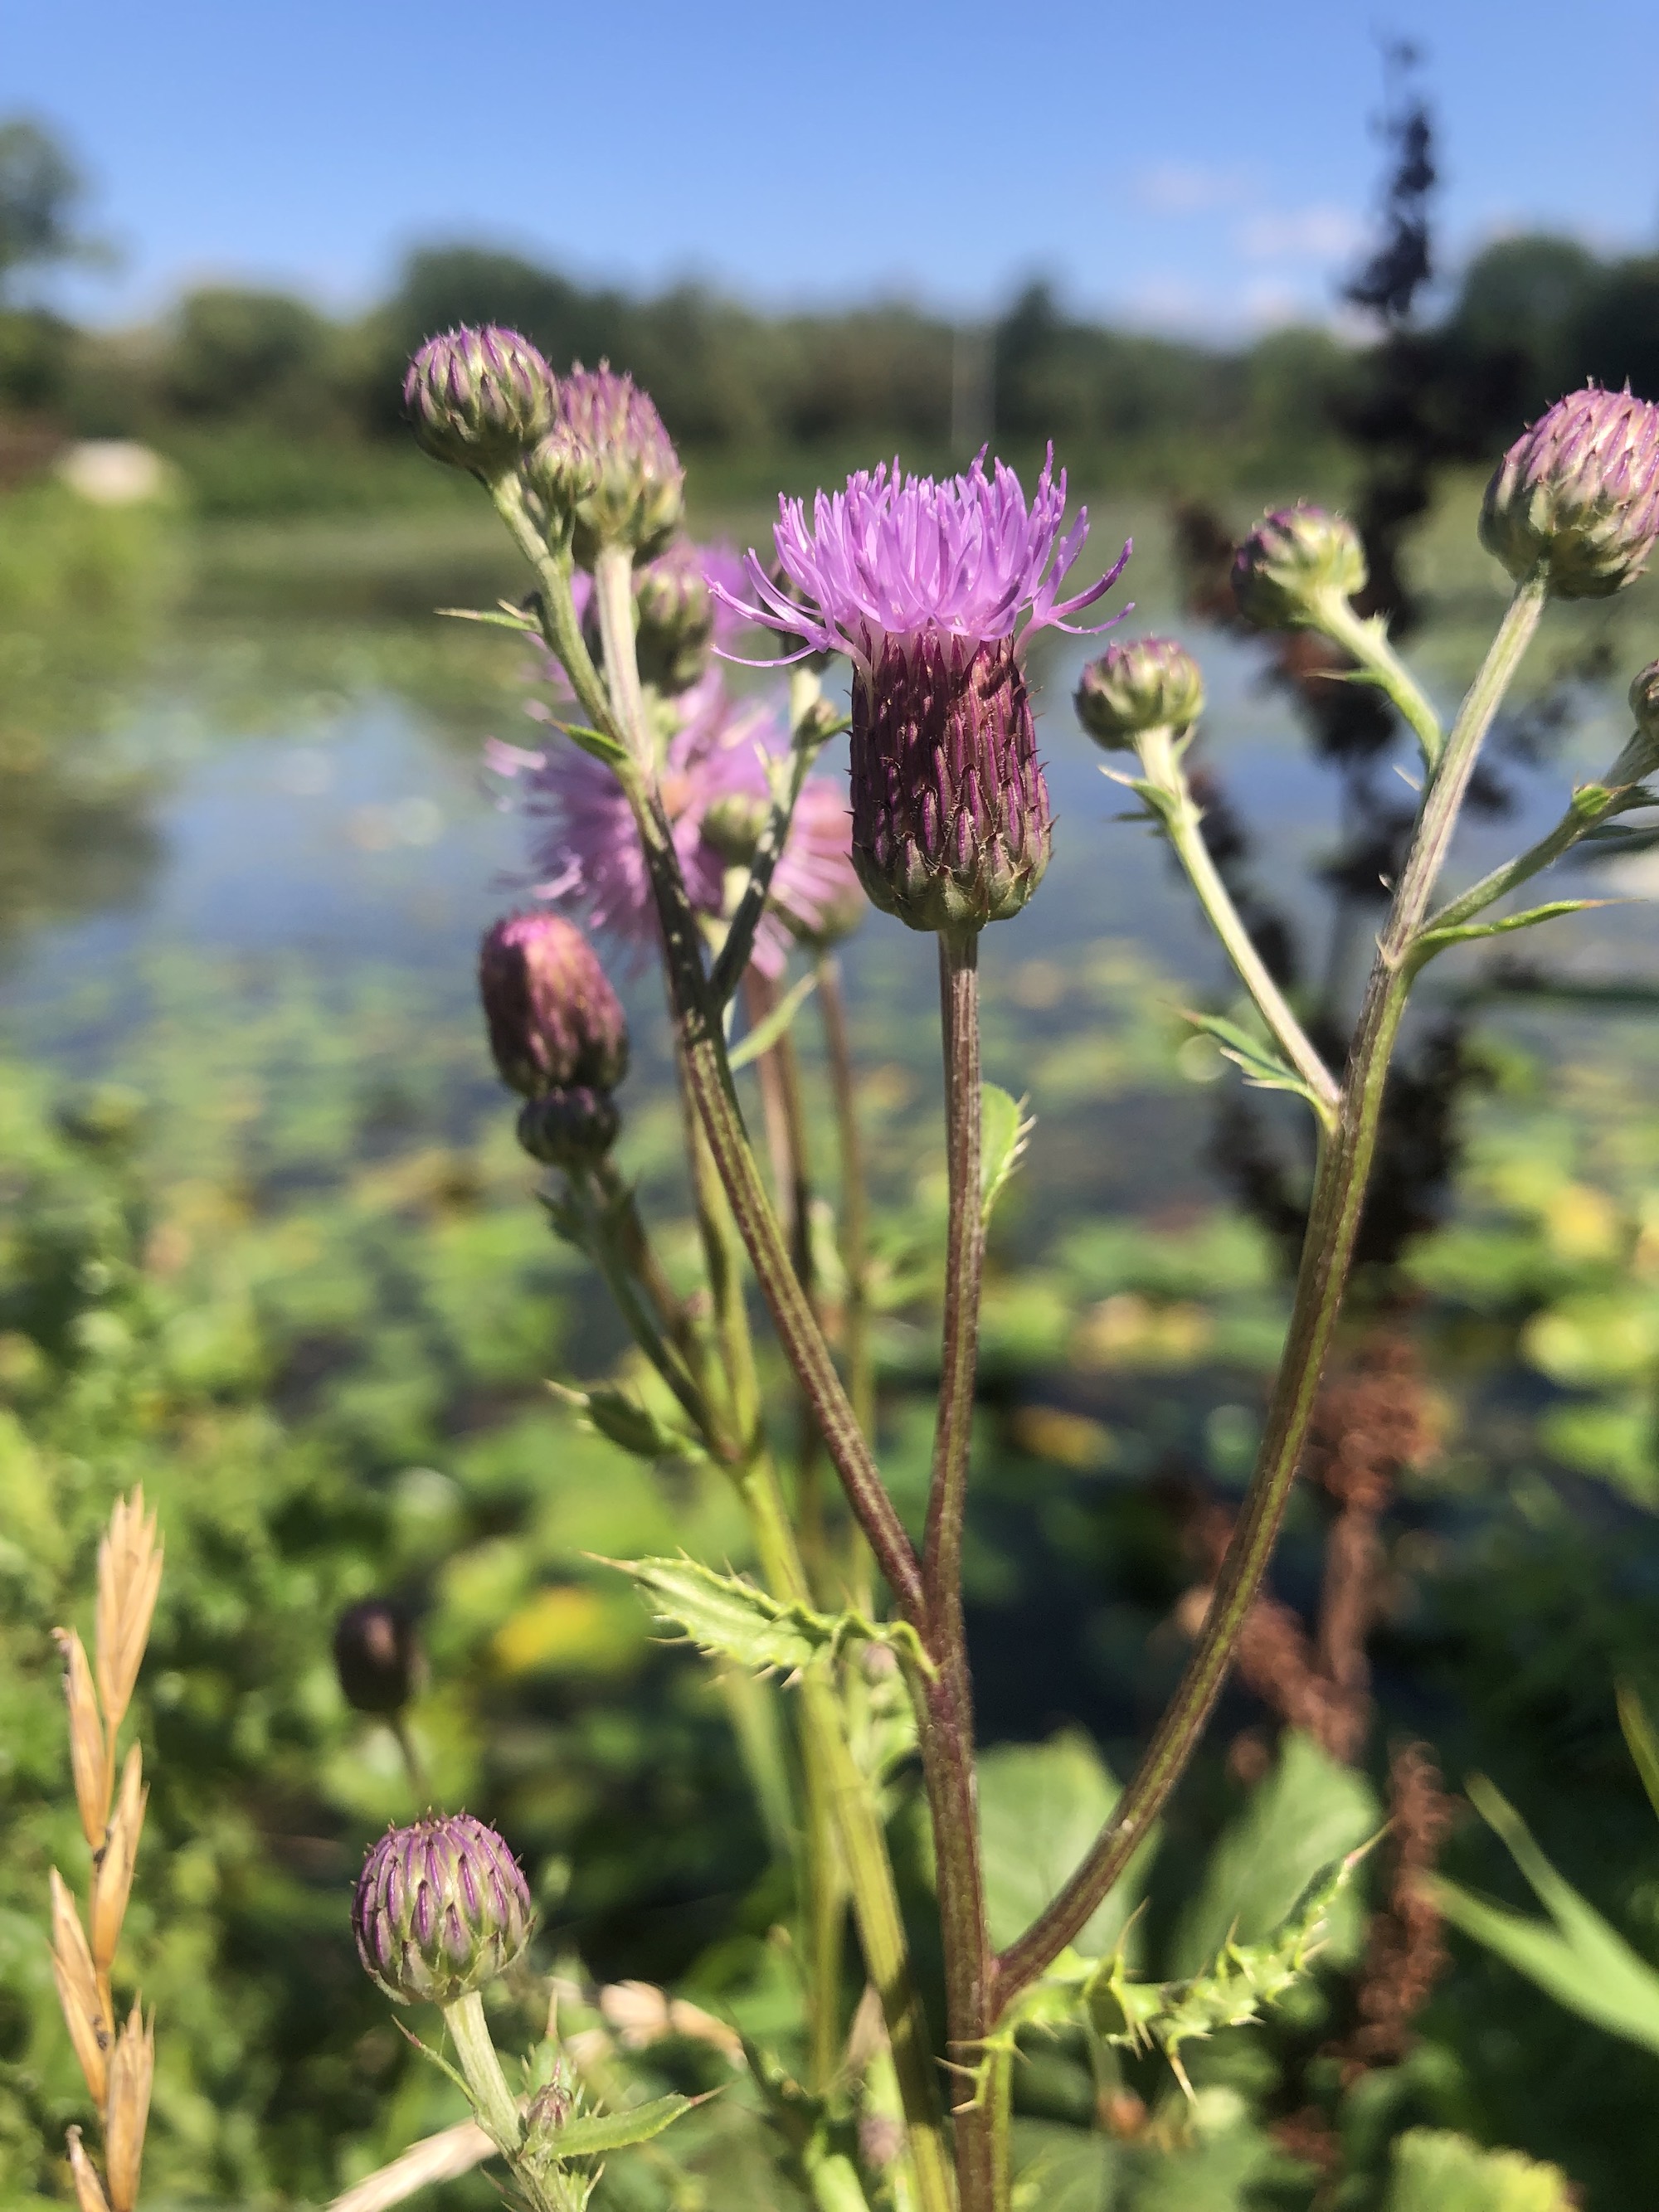 Bee on Canada Thistle on the shore of Vilas Park Lagoon in Vilas Park in Madison, Wisconsin on August 26, 2022.